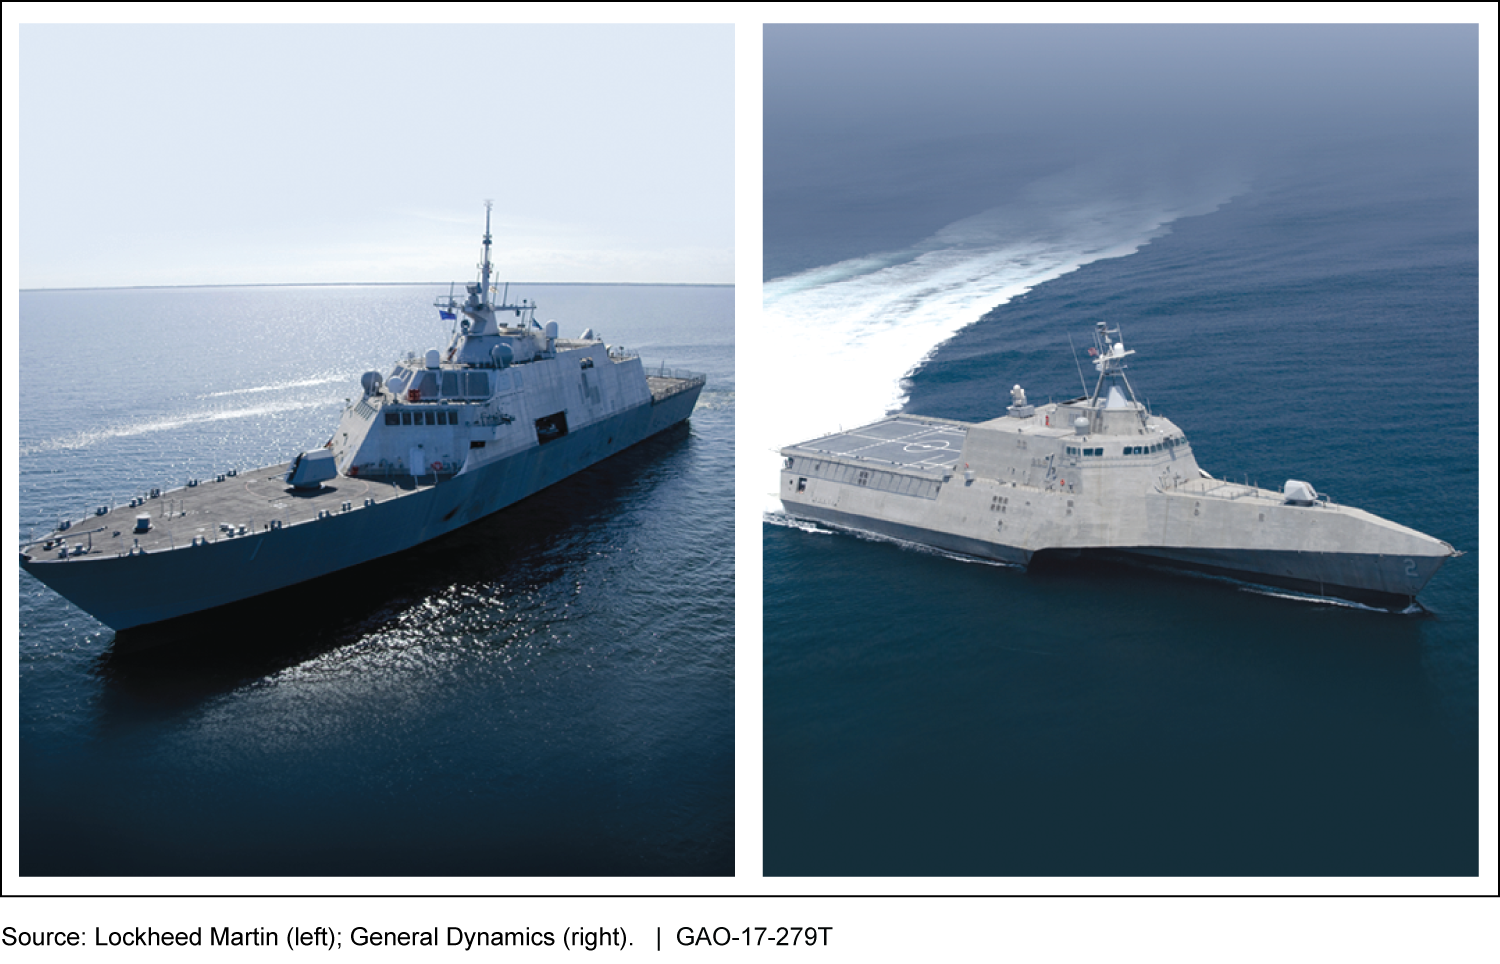 Photos of the two Littoral Combat Ship variants, Freedom (left) and Independence (right).